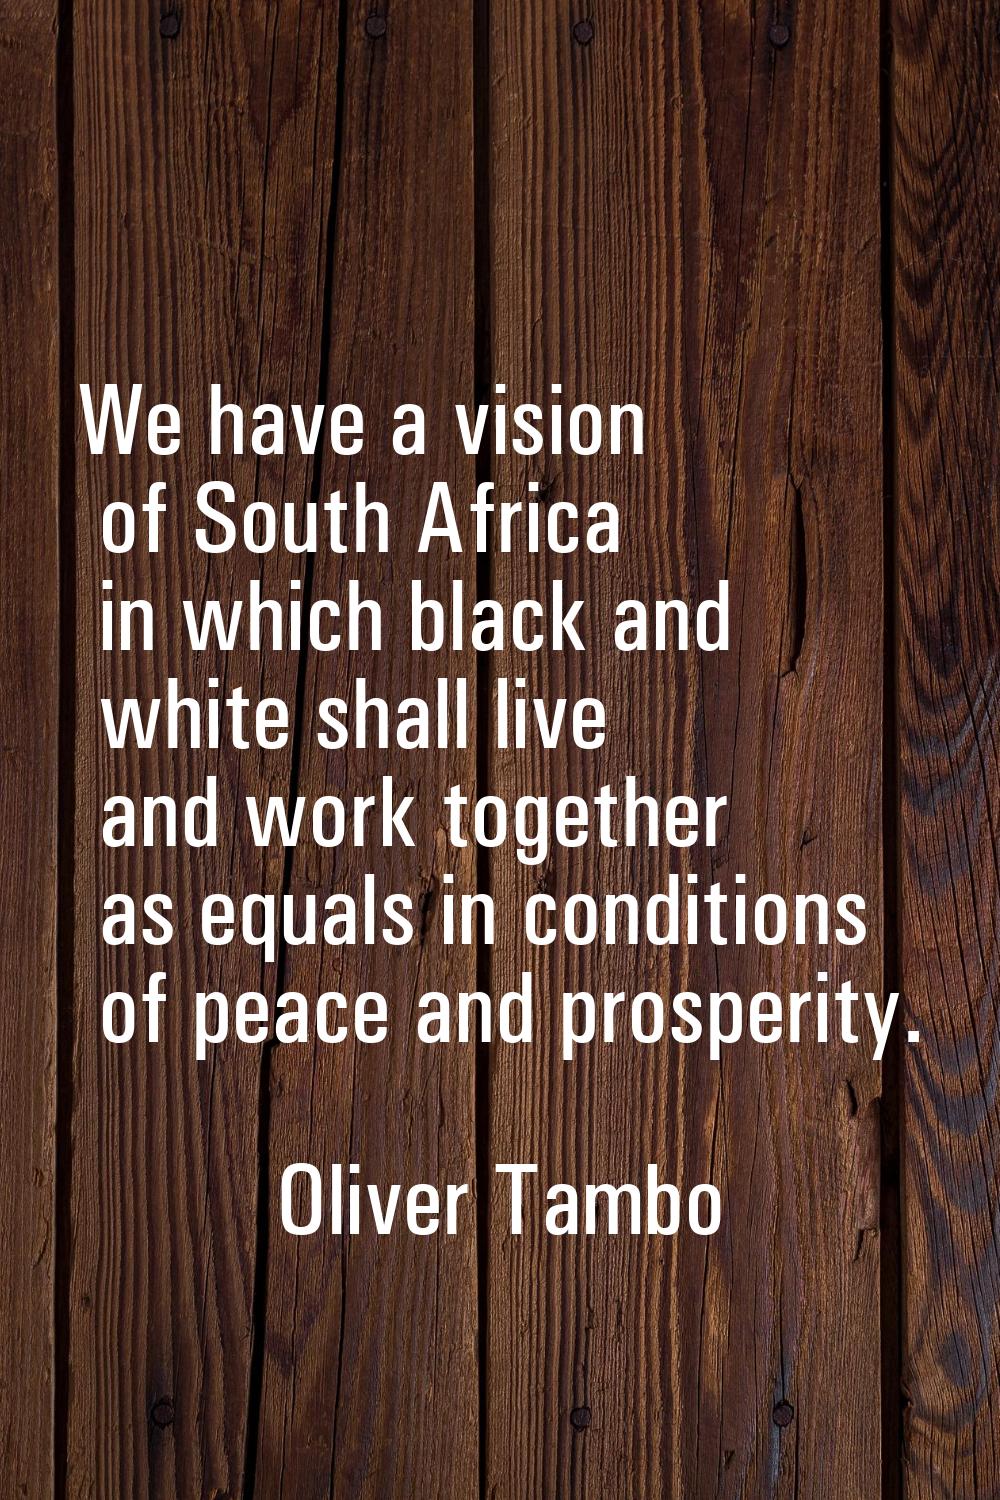 We have a vision of South Africa in which black and white shall live and work together as equals in